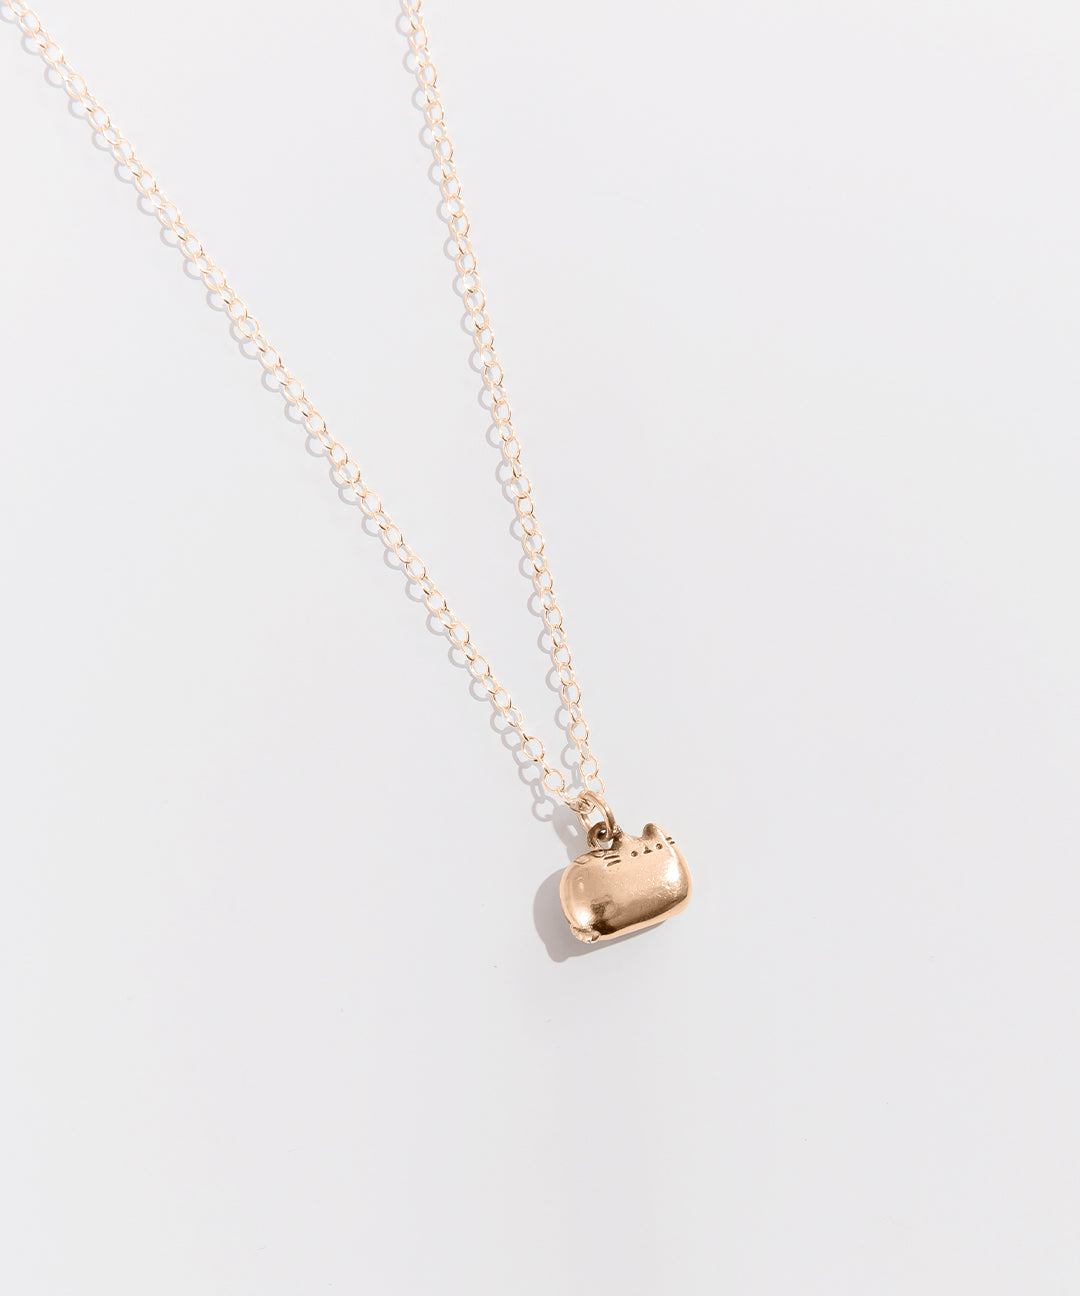 Custom Charm Necklace, Personalized and Customizable in Gold, Rose Gold, or  Silver – Honeycat Jewelry